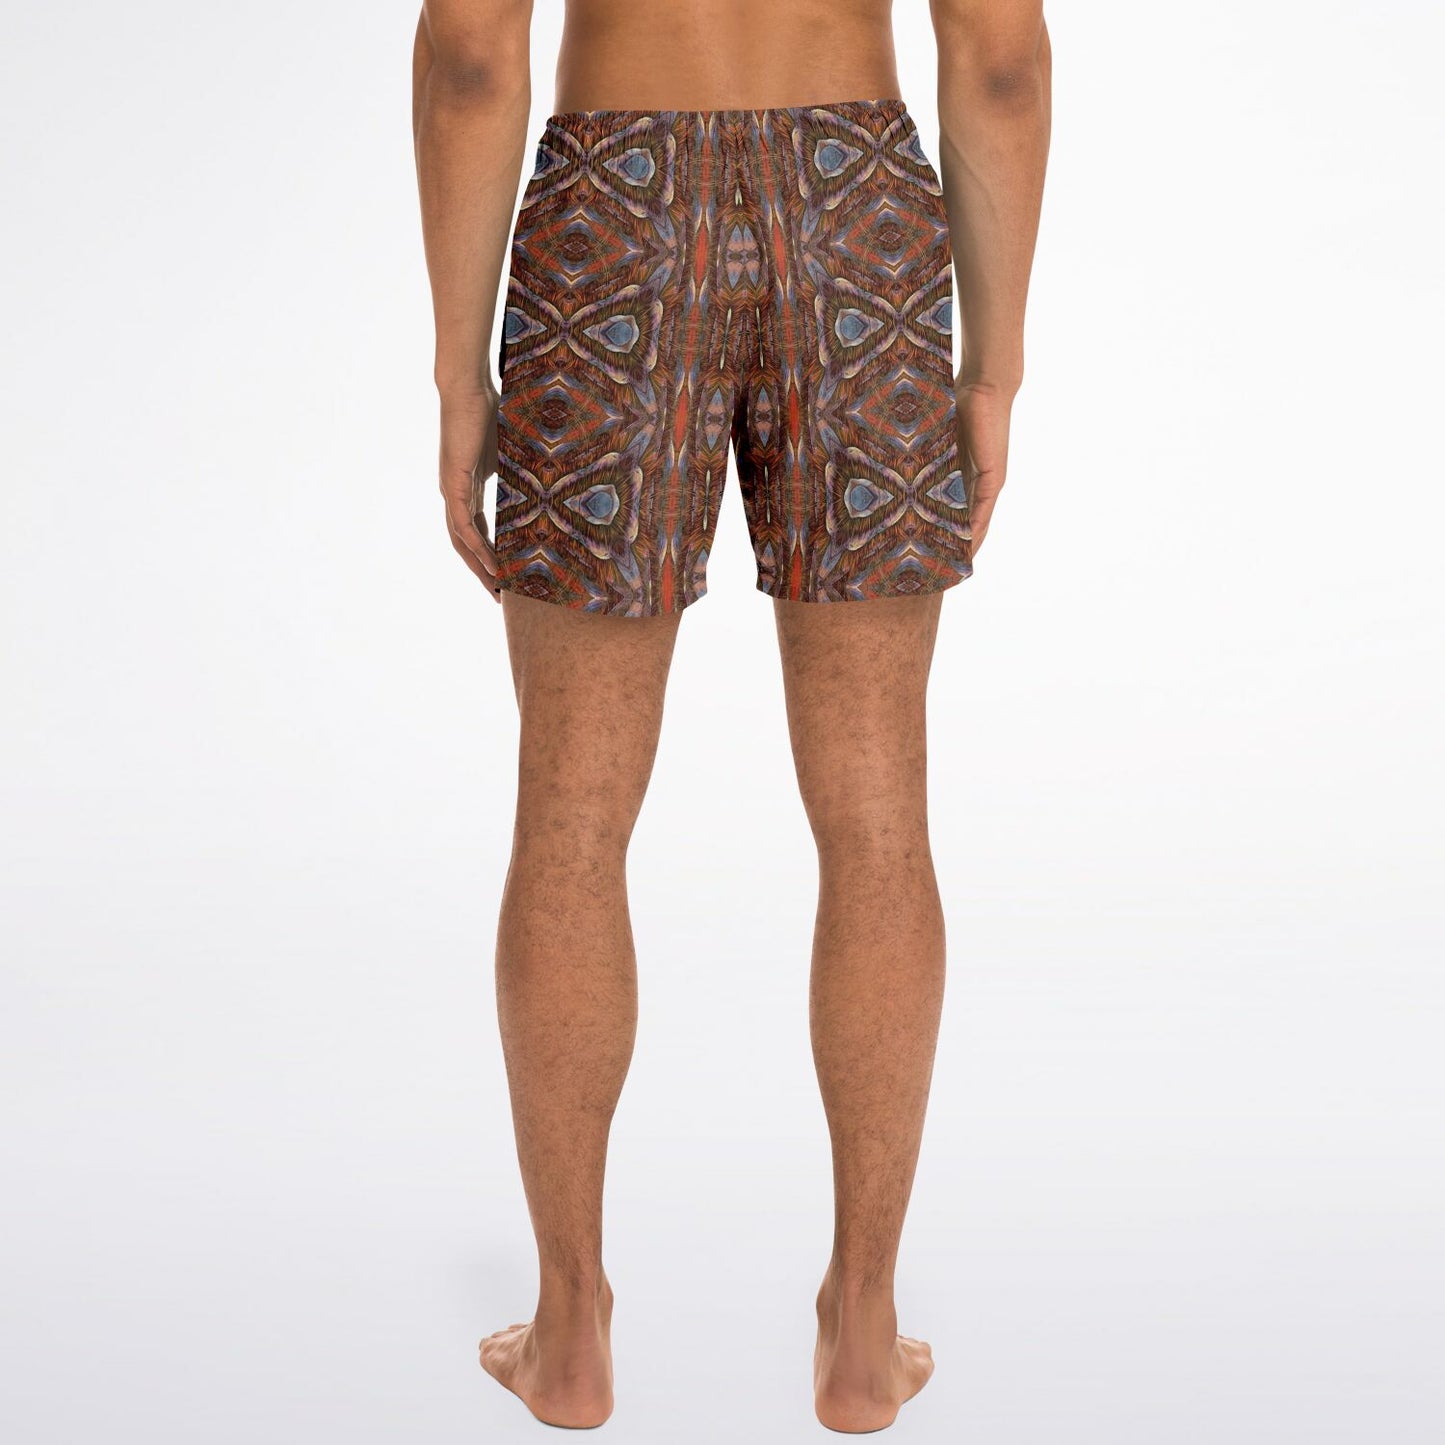 swimming trunks with desert brown and orange pattern